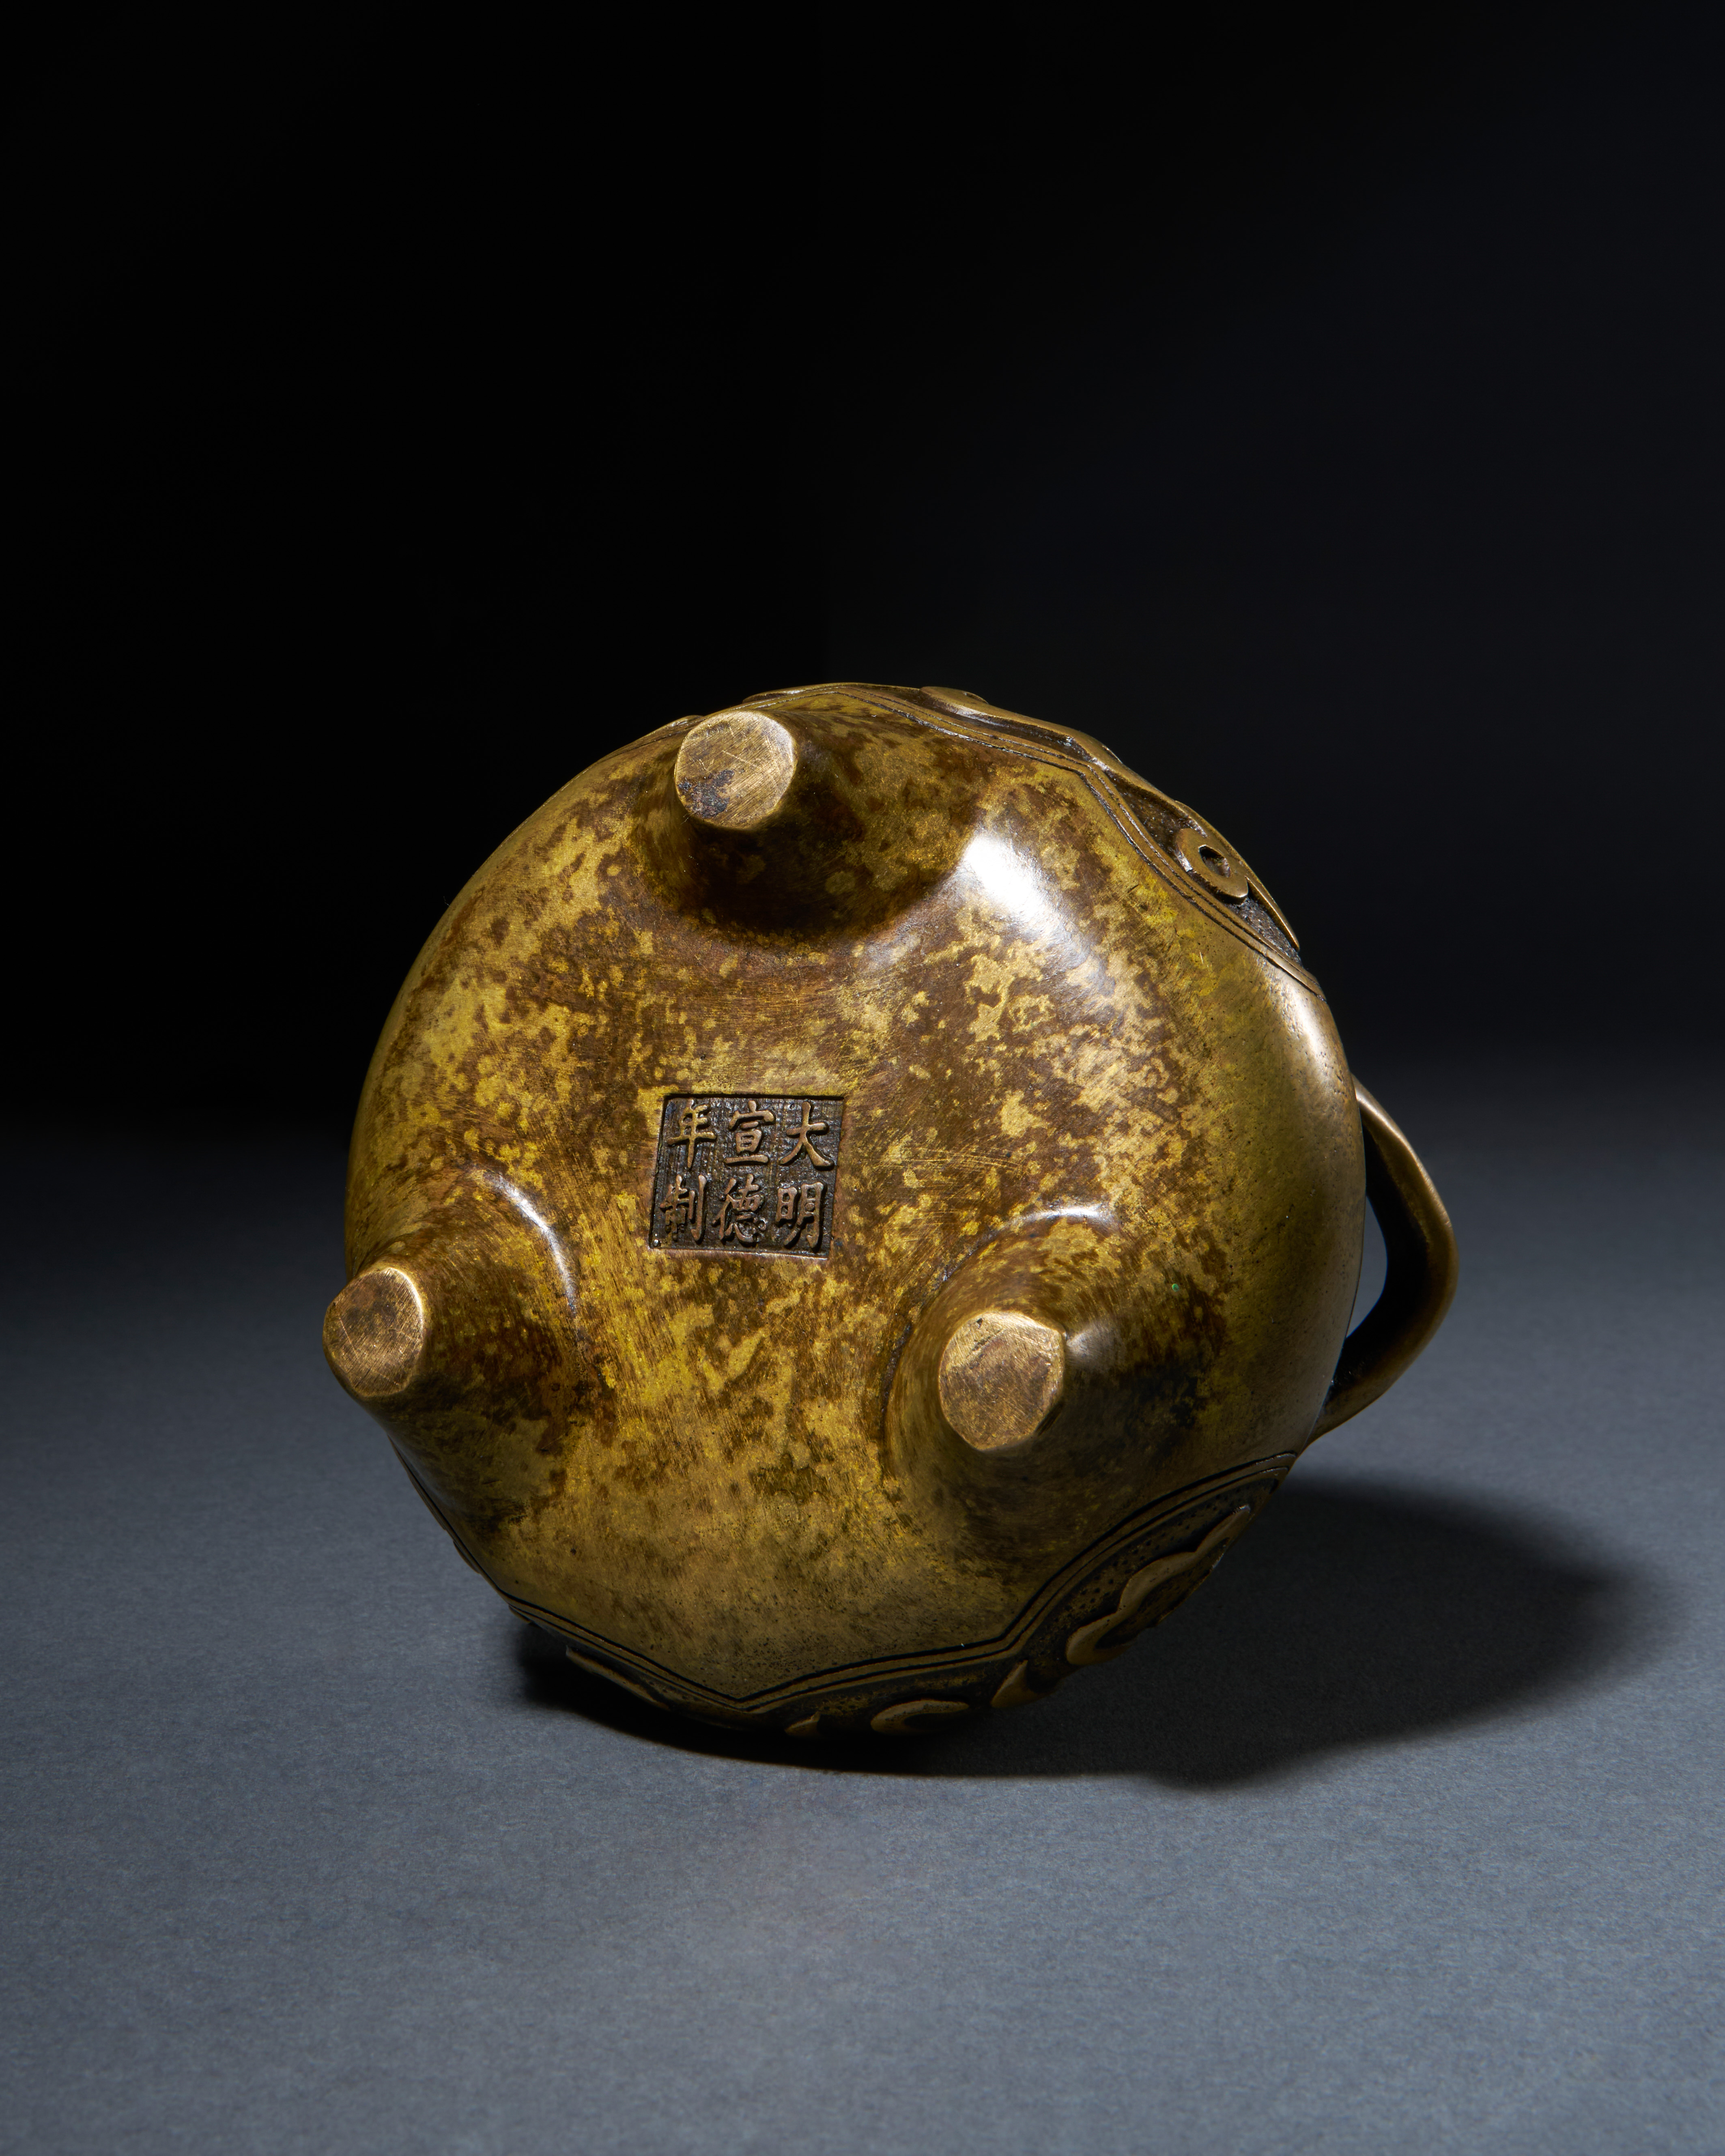 A BRONZE INCENSE BURNER WITH ARABIC INSCRIPTIONS, 17TH/18TH CENTURY - Image 3 of 4